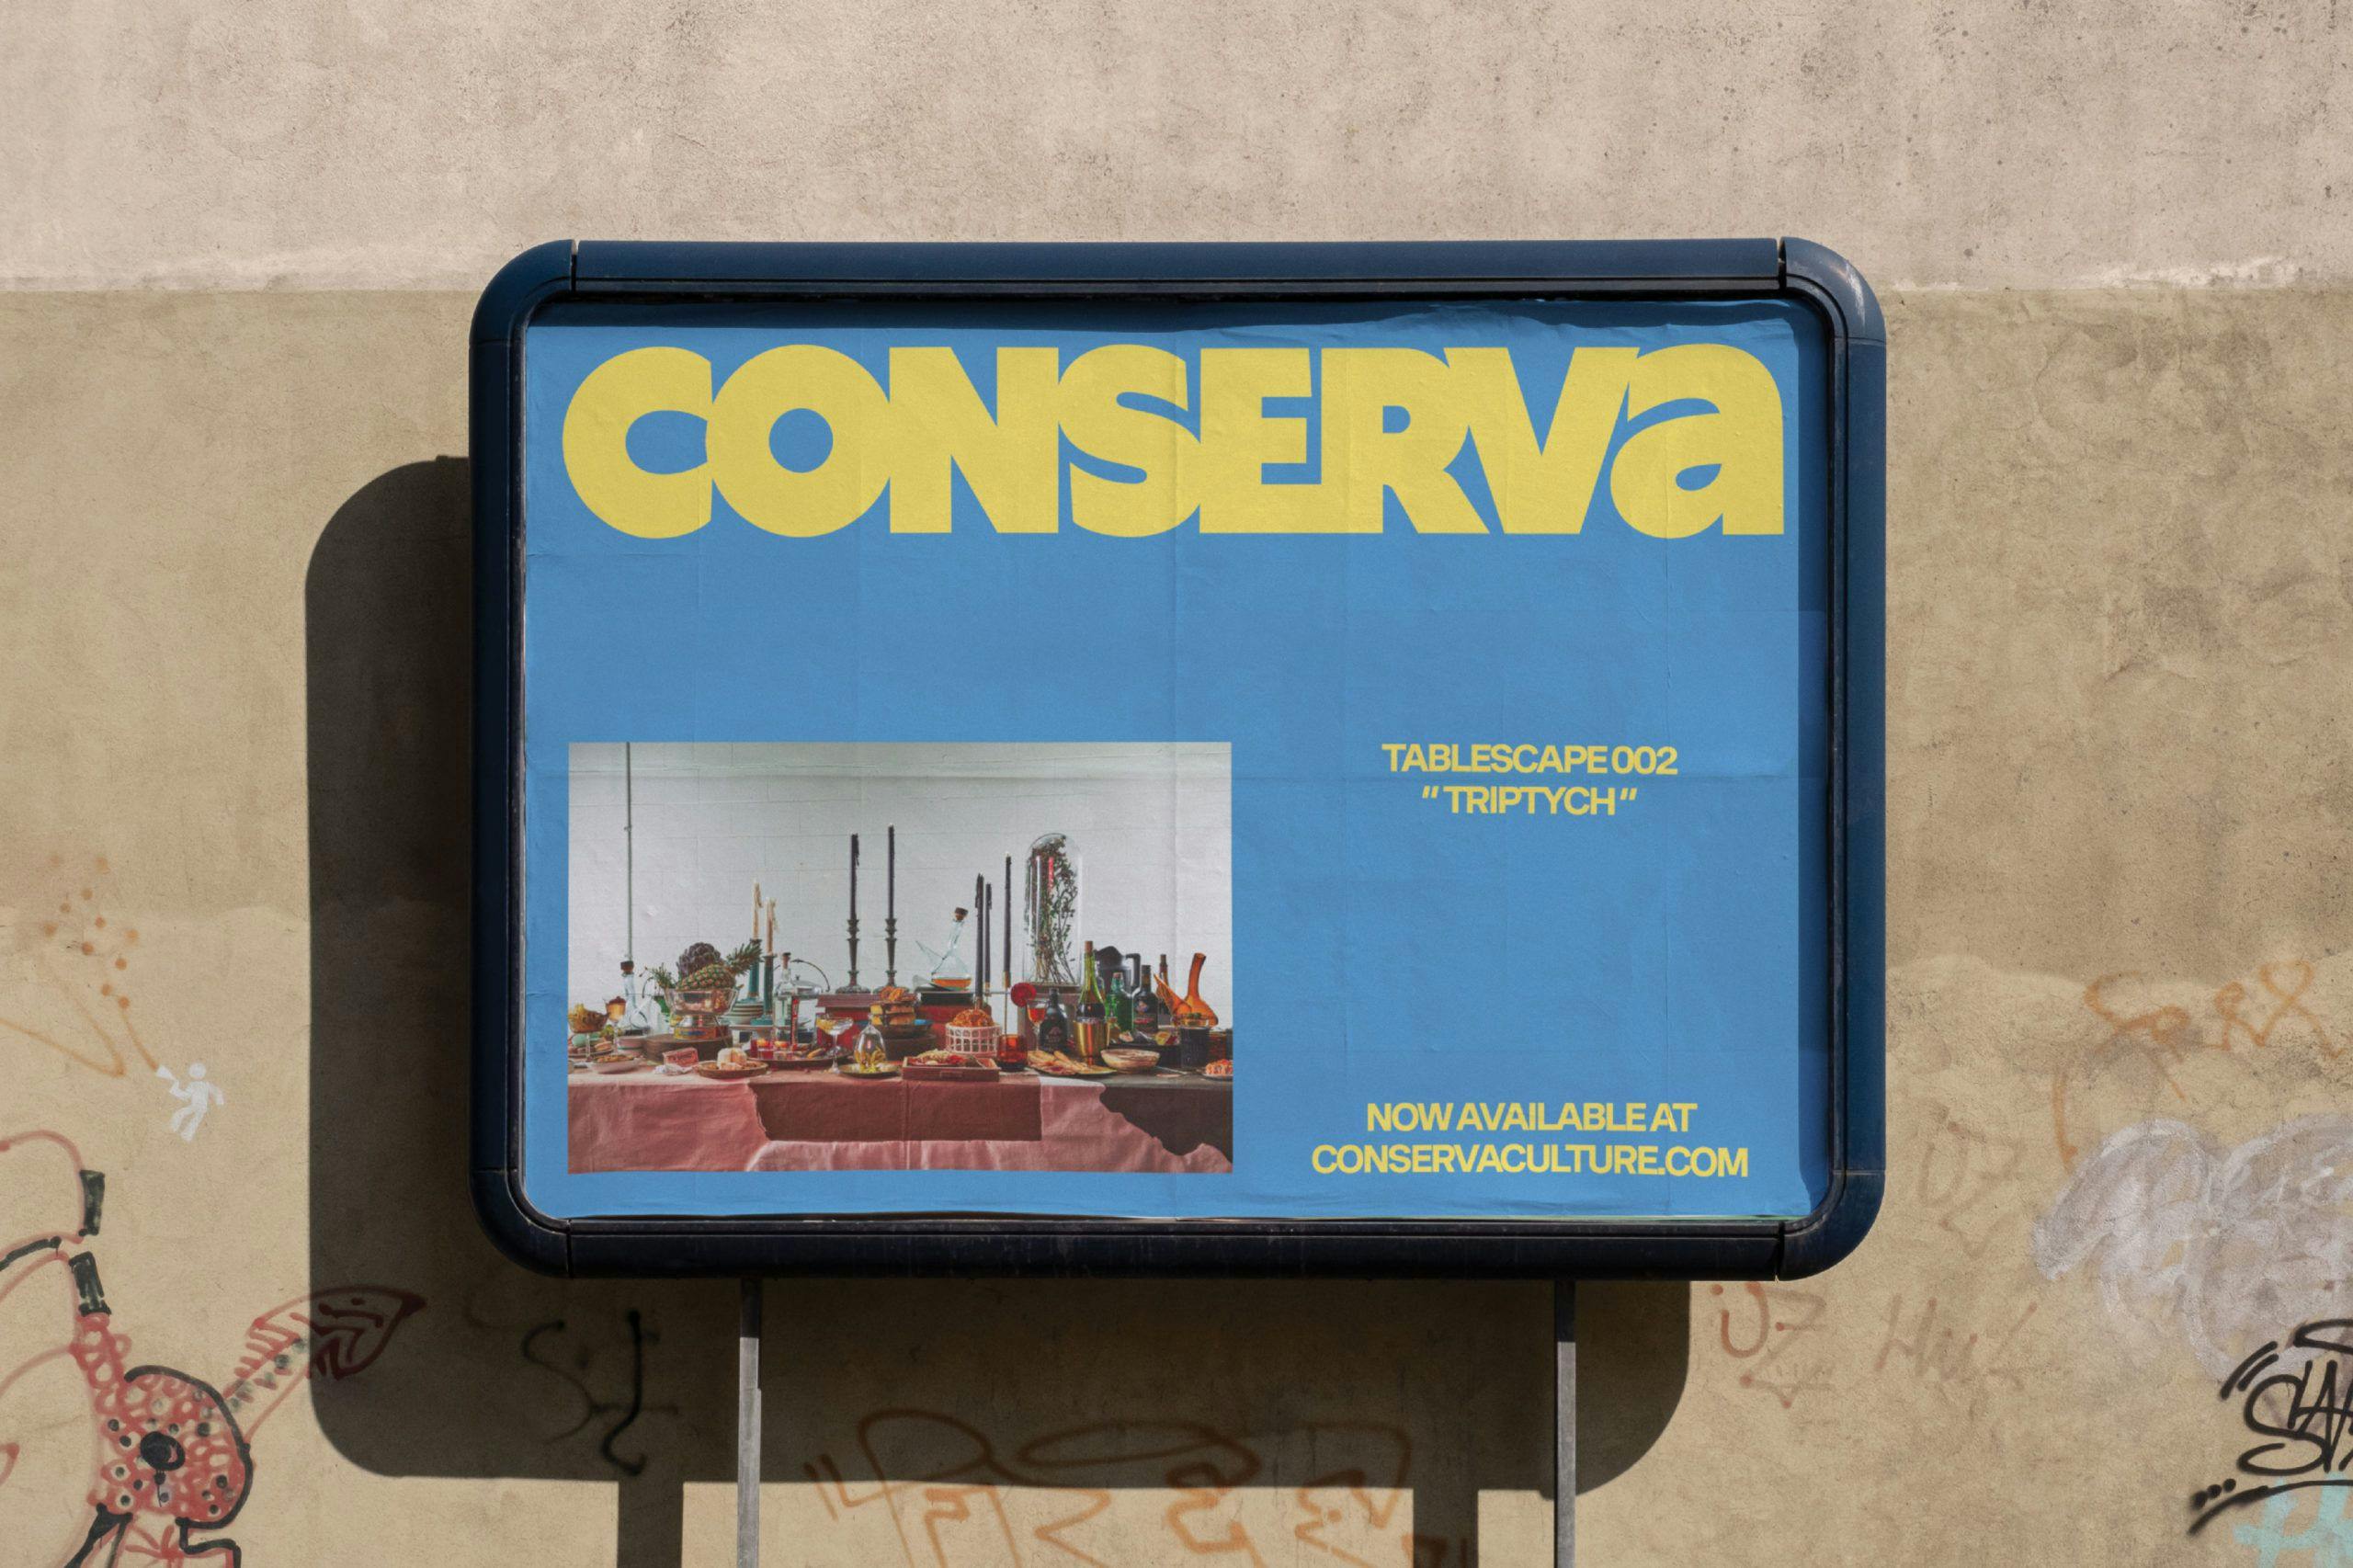 Conserva sign displaying Tablescape 002 "Triptych"